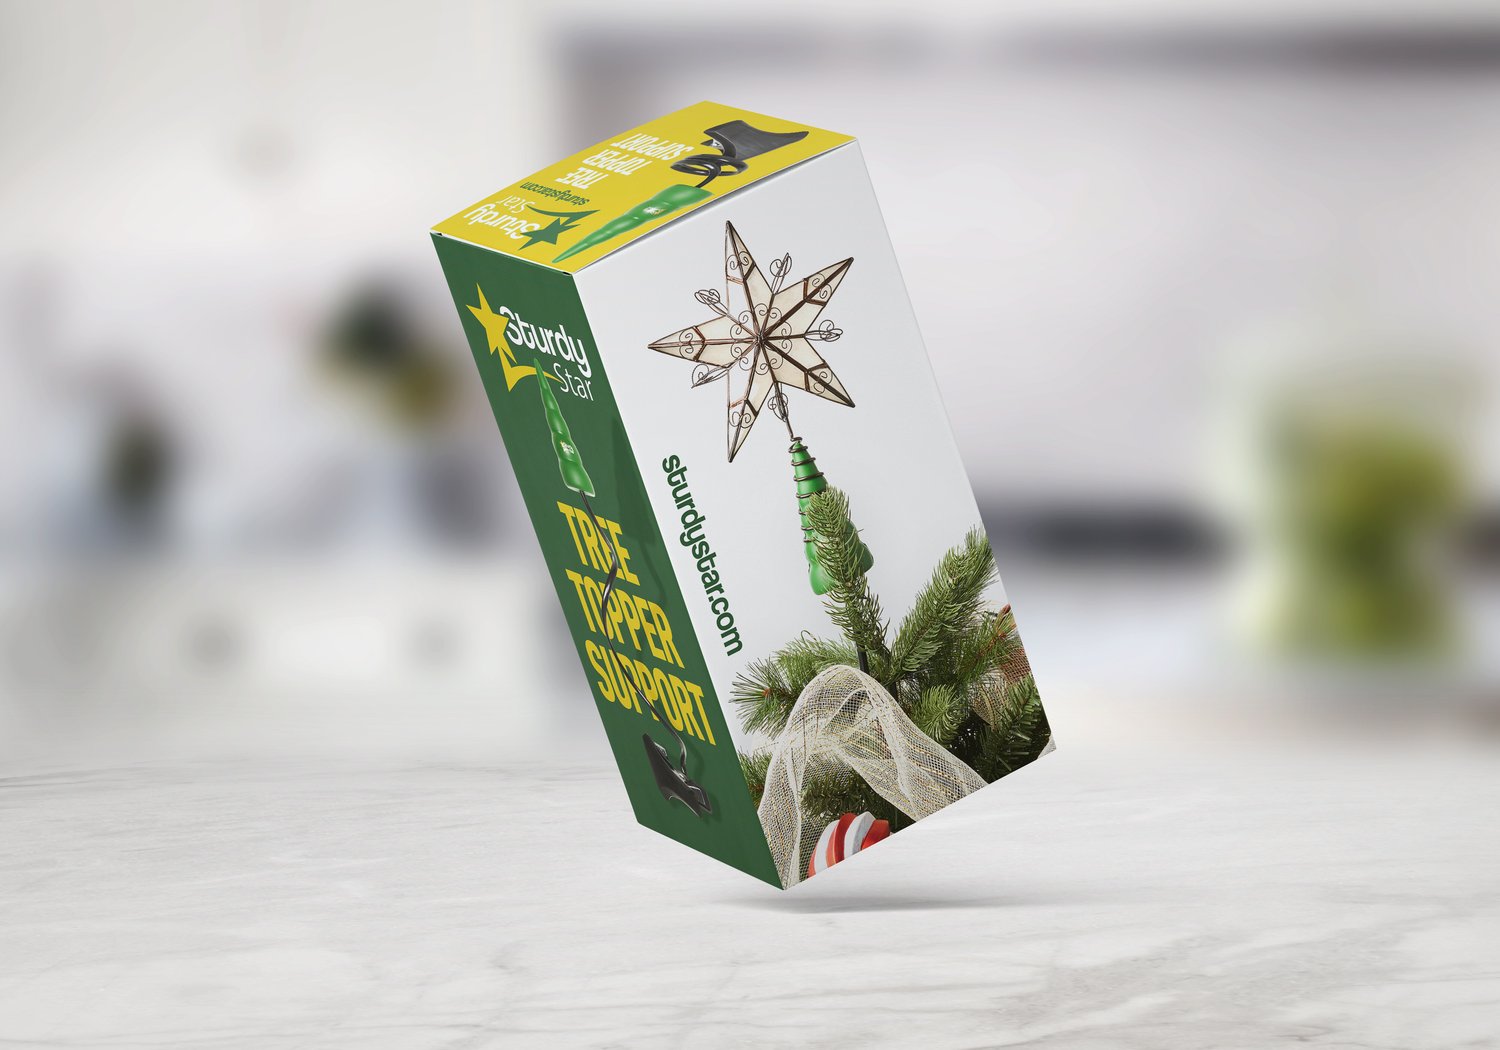 Unboxing the Sturdy Star tree topper support from its packaging.